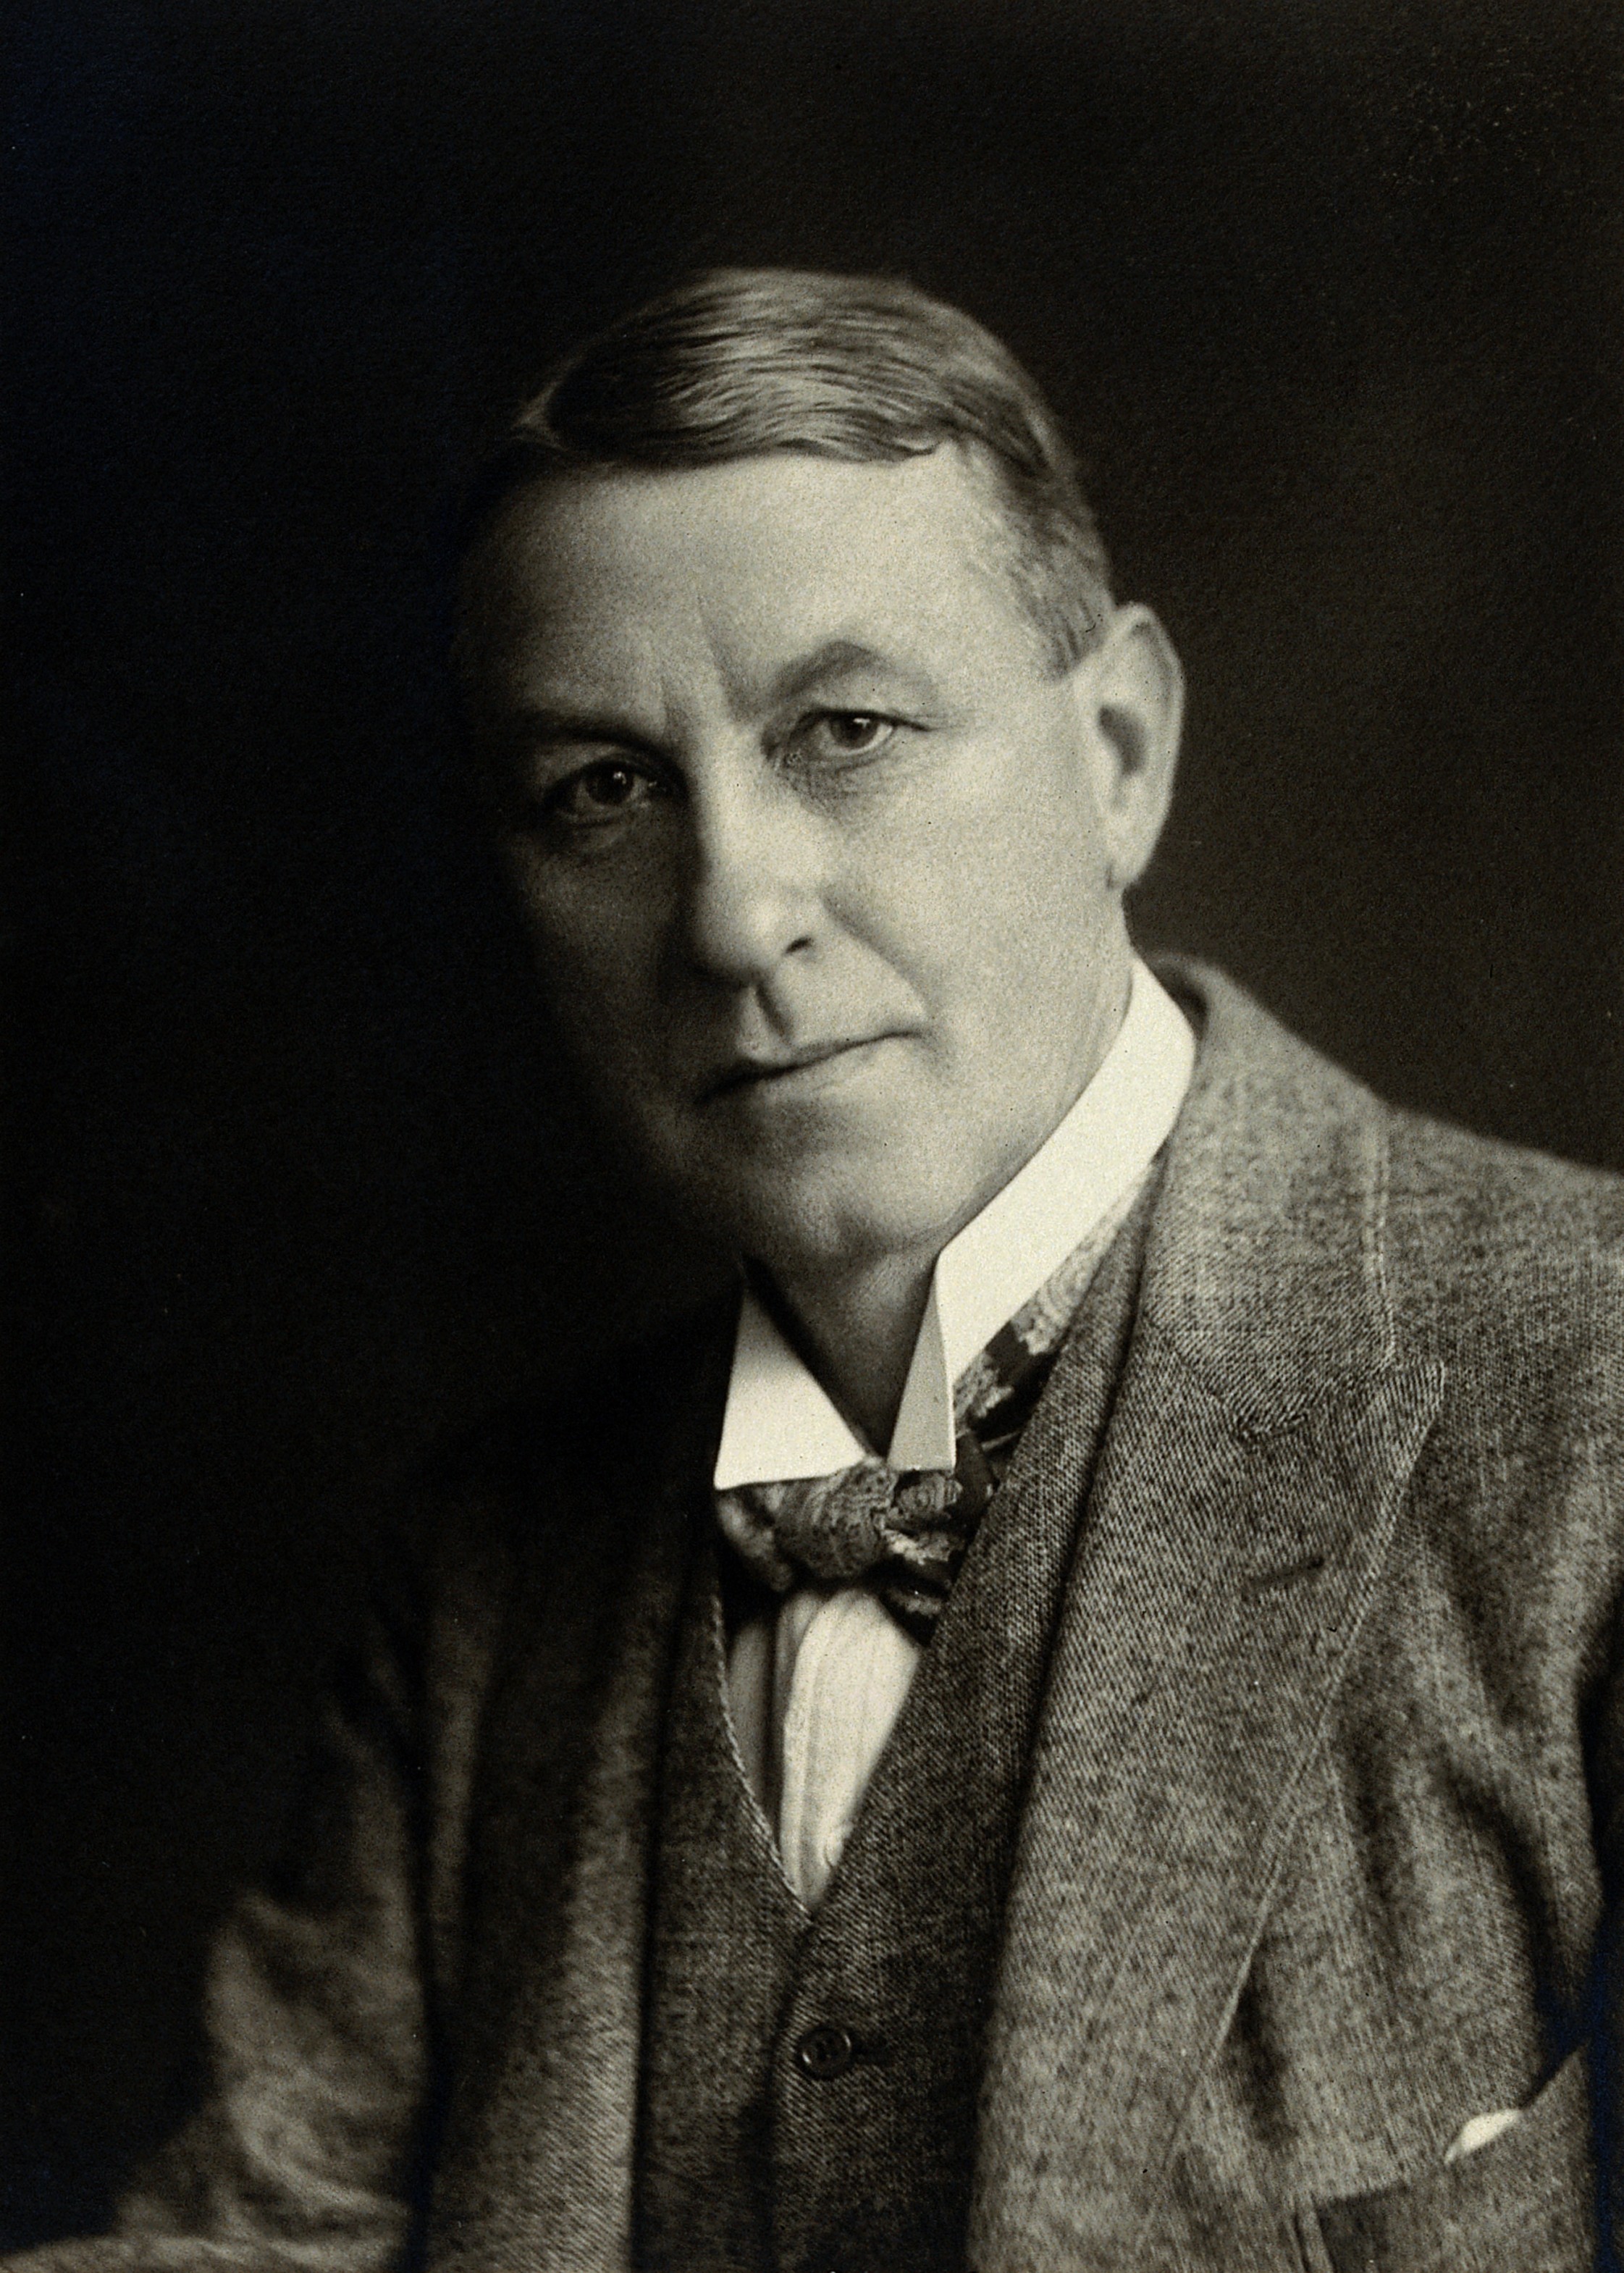 Philip Percy Manning. Photograph by Elliott & Fry. Wellcome V0026804